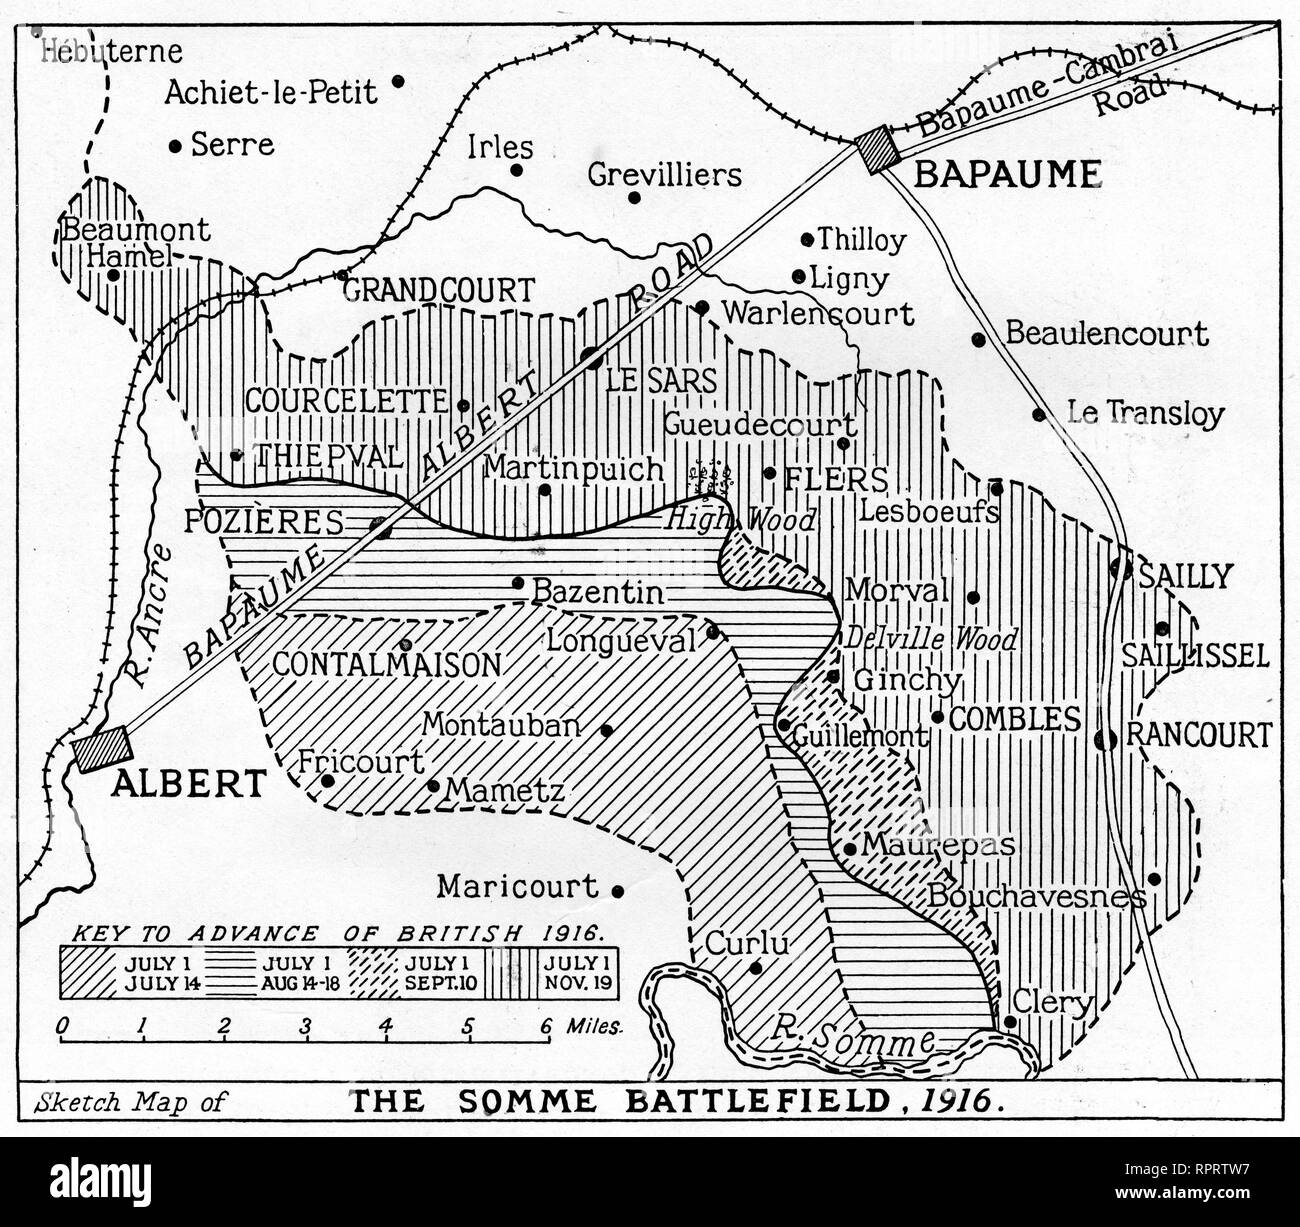 A map of the Somme Battlefield, 1916. The Battle of the Somme, also known as the Somme Offensive, was a battle of the World War I fought by the armies of the British Empire and French Third Republic against the German Empire. It took place between 1st July and 18th November 1916. Stock Photo